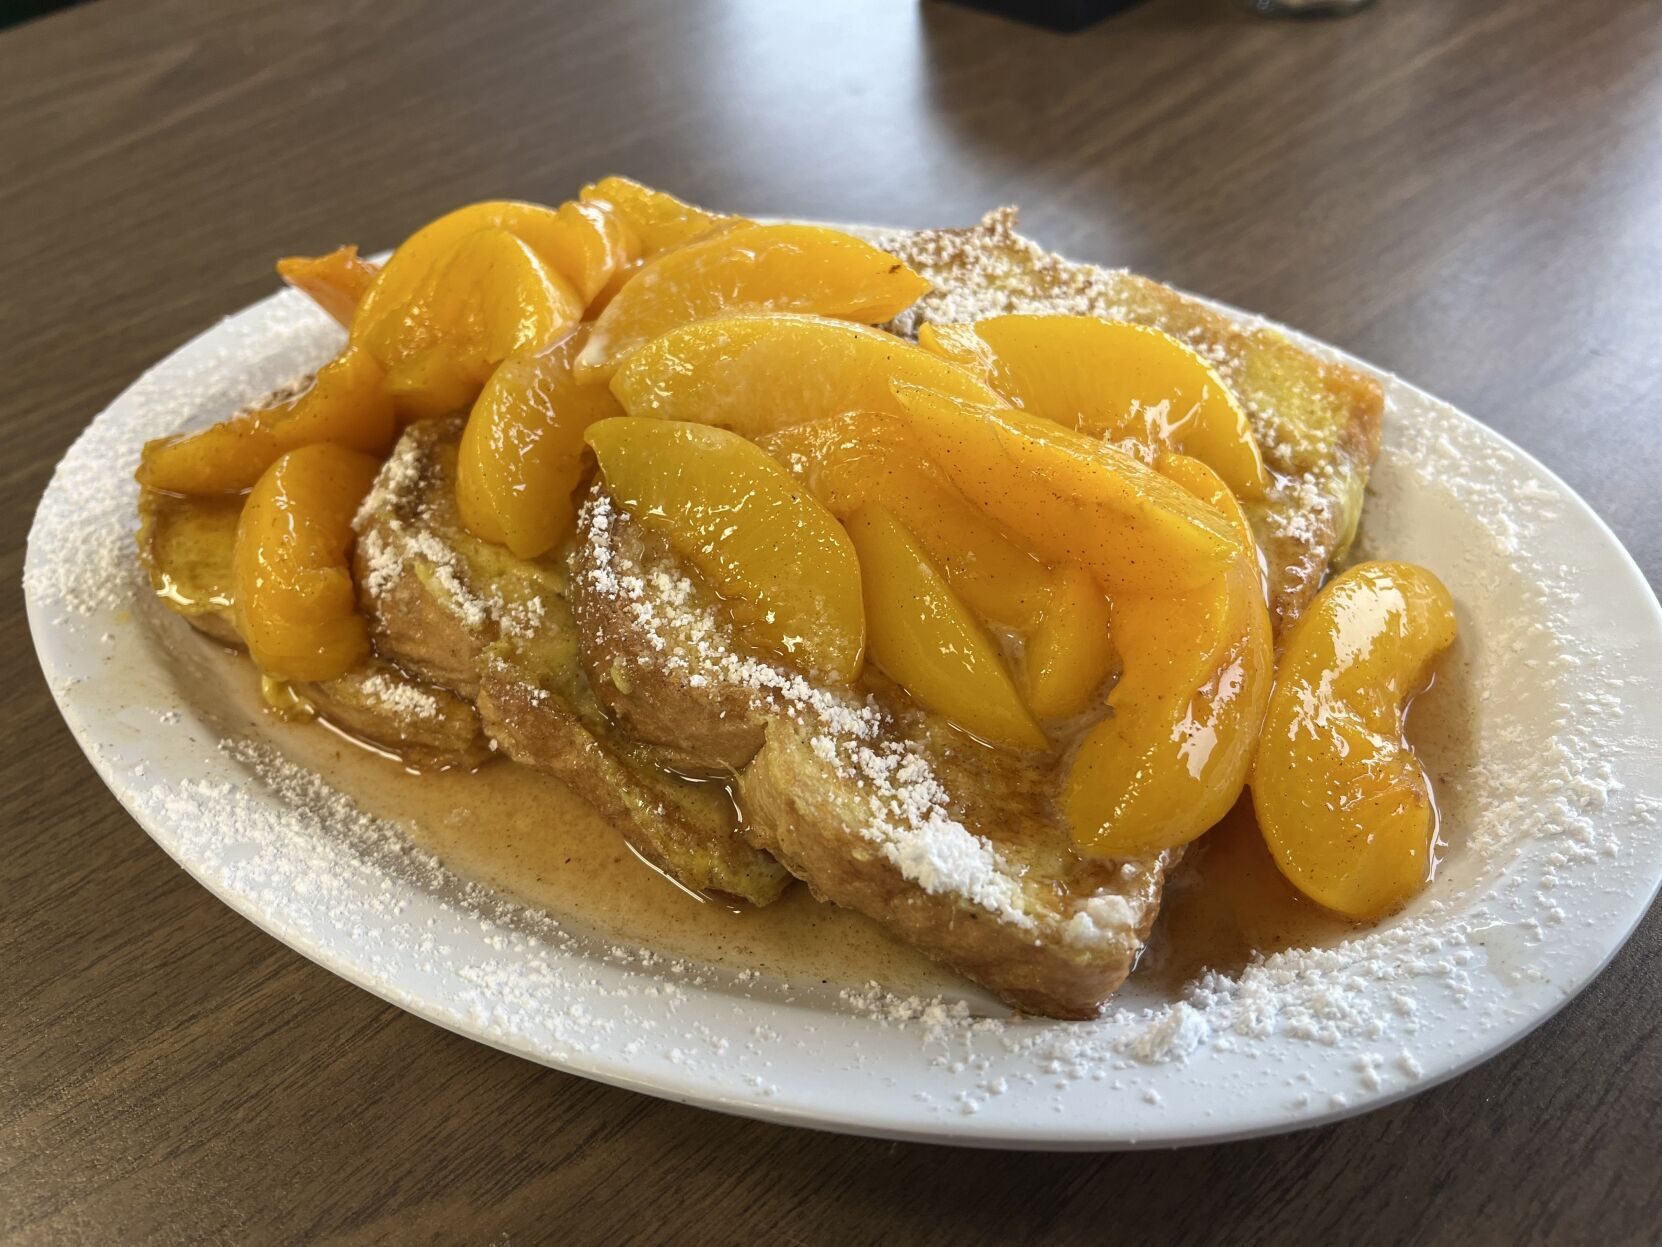 Affton Diner French toast starts with a peach syrup reduction pic